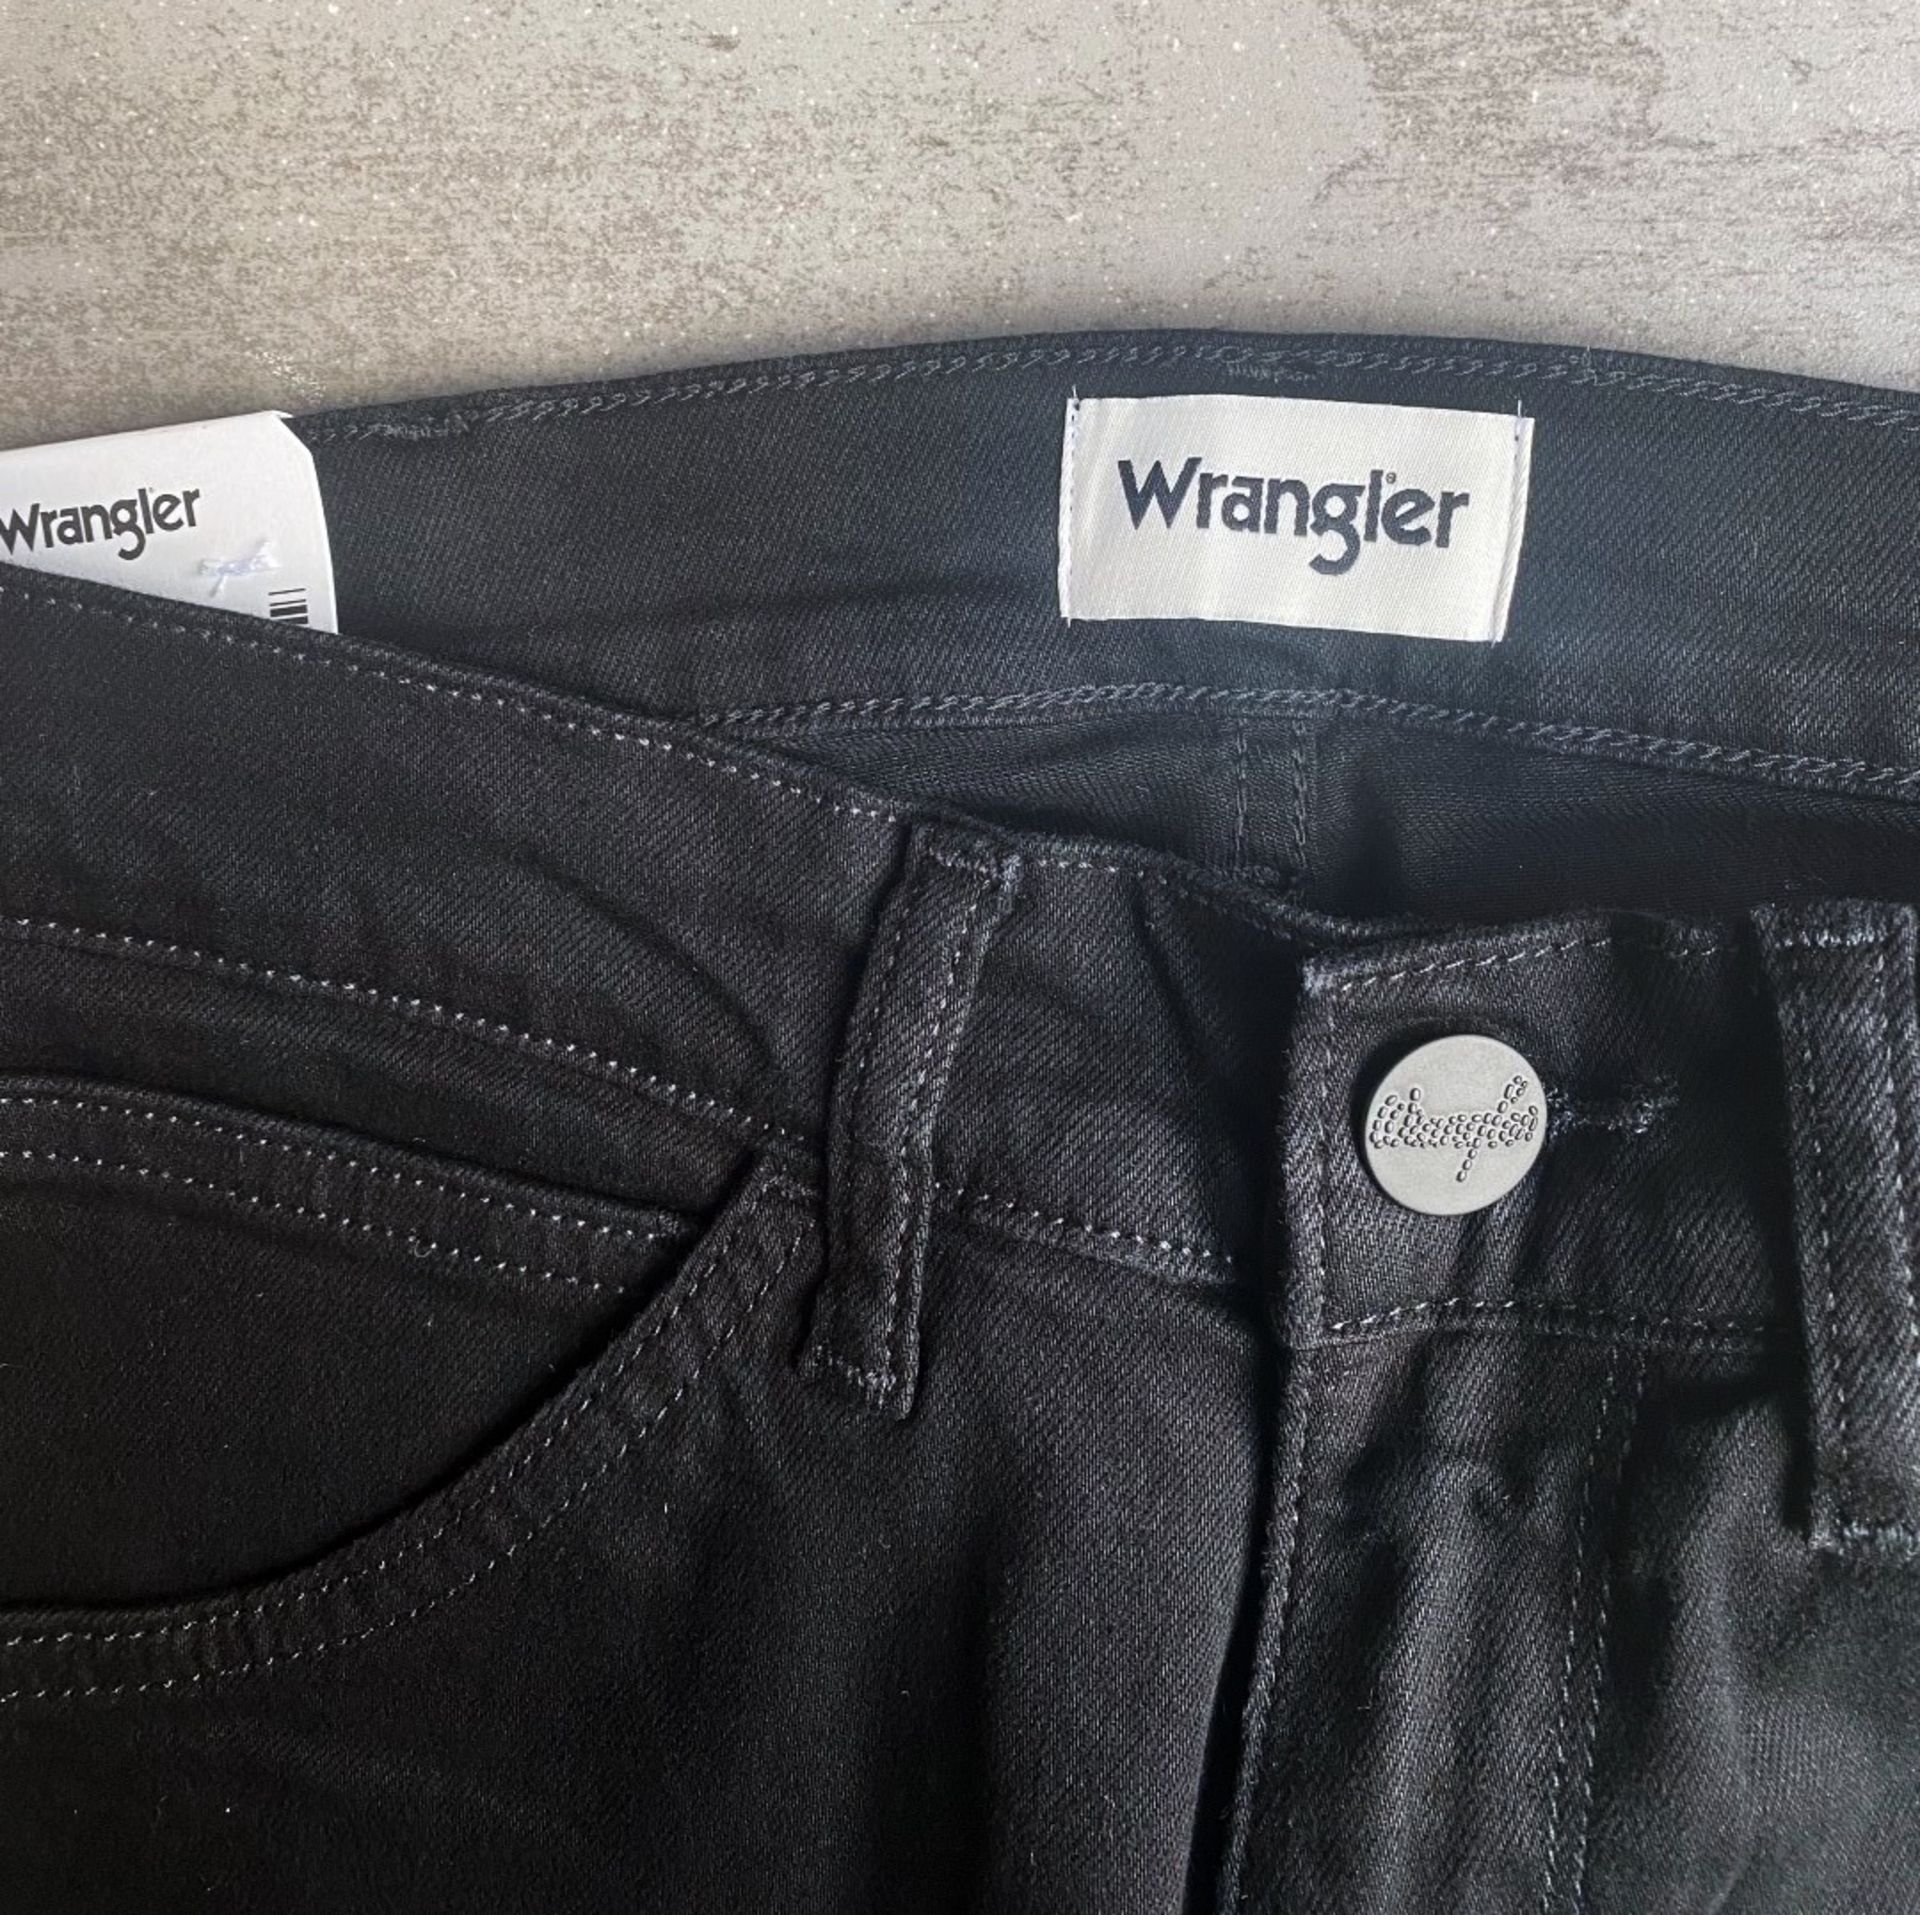 1 x Pair Of Men's Genuine Wrangler Jeans In Black - Size: 30/32 - Preowned, Like New With Tags - - Image 10 of 10